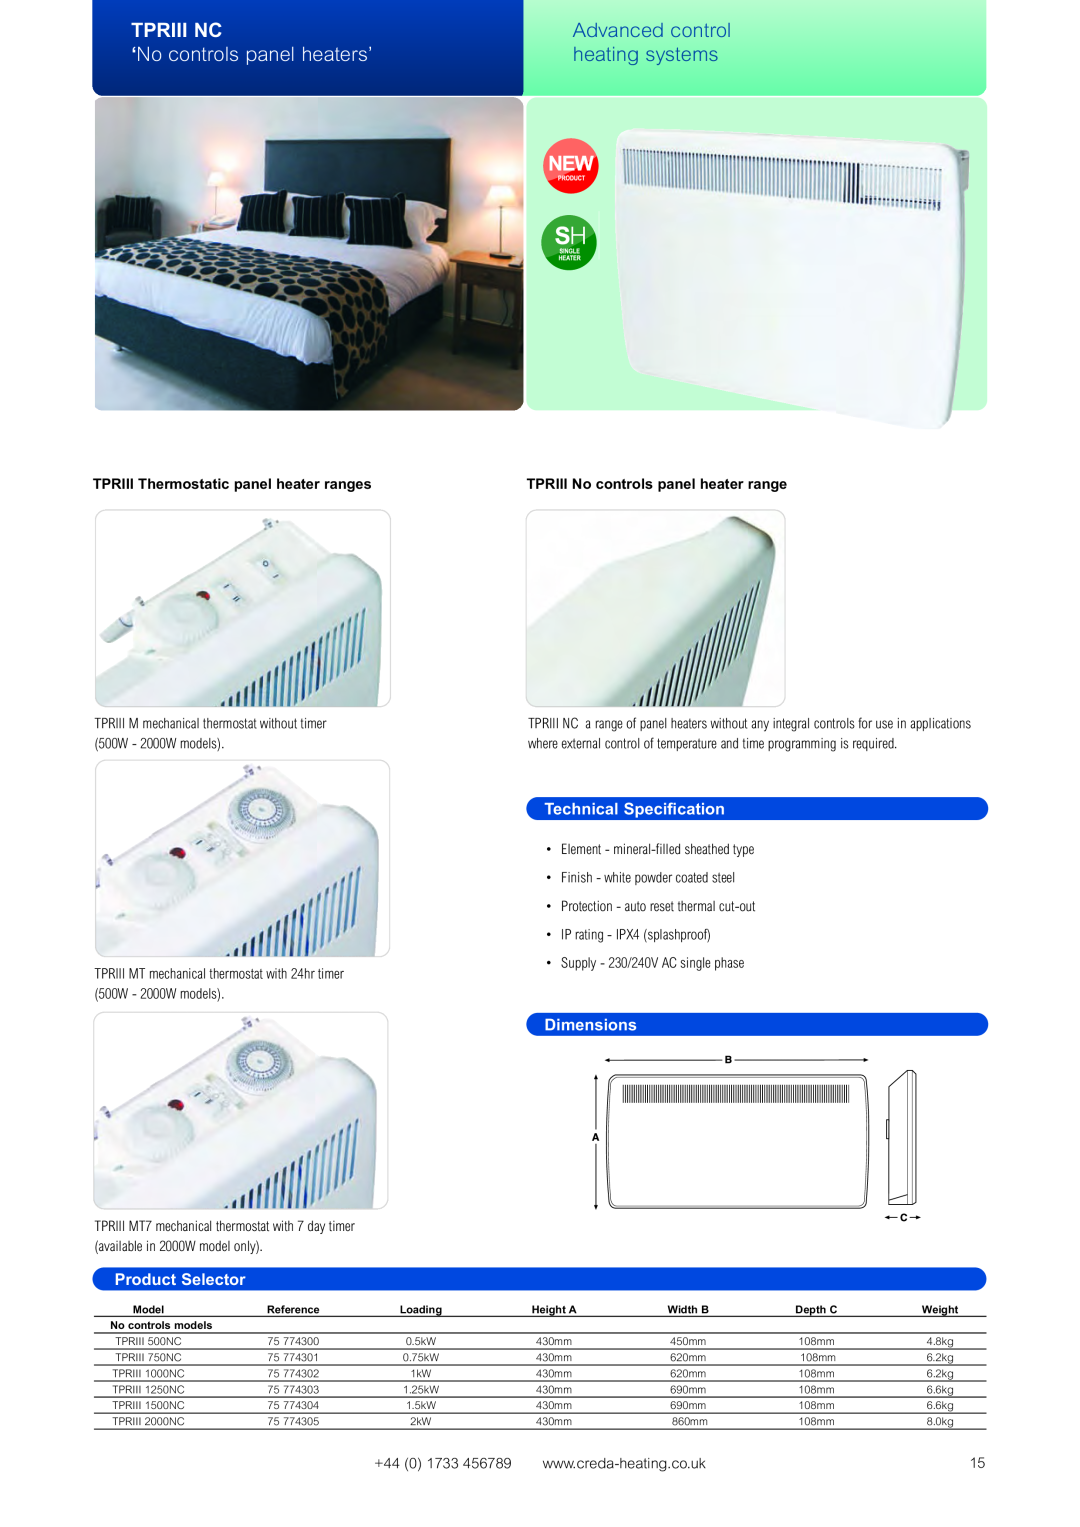 Creda Advanced Control Heating Systems manual Tpriii Nc, Advanced control, ‘No controls panel heaters’, heating systems 